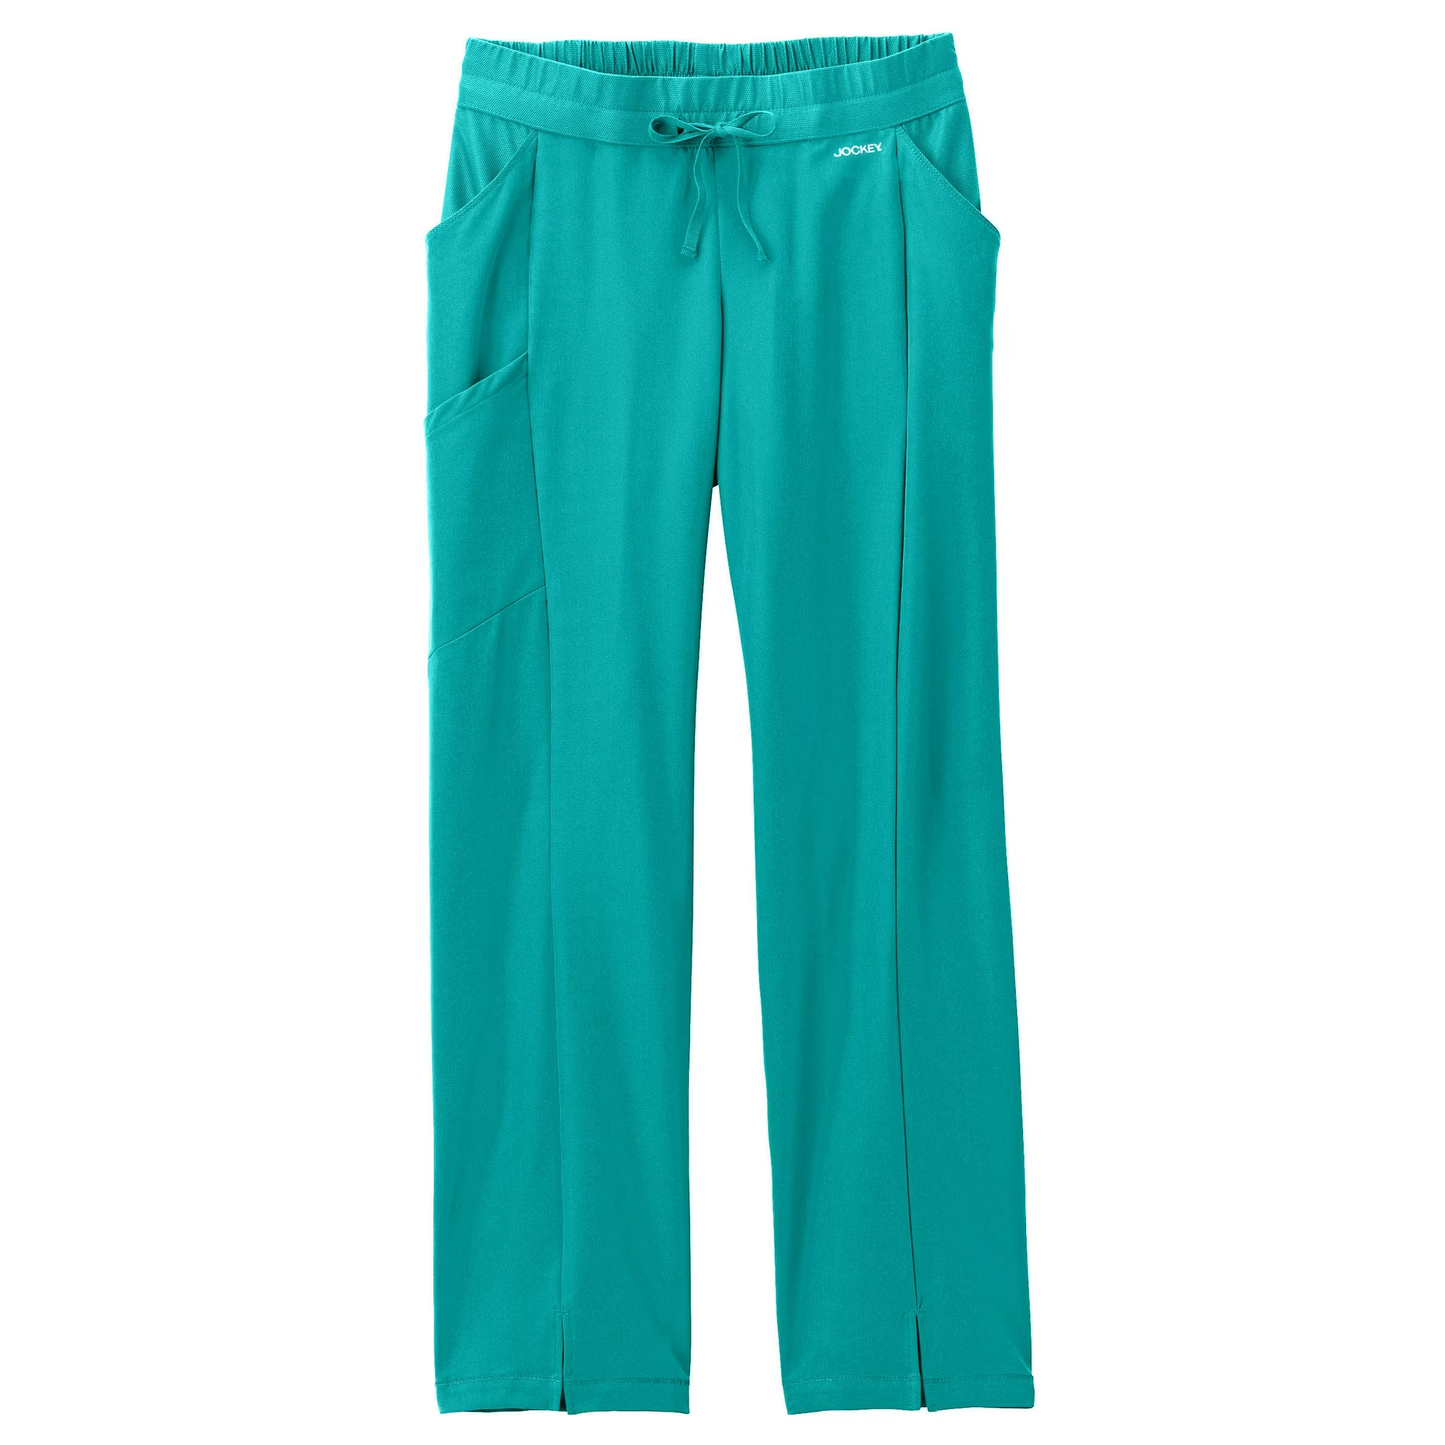 Clearance Jockey Performance Rx Get Up and Go Pants